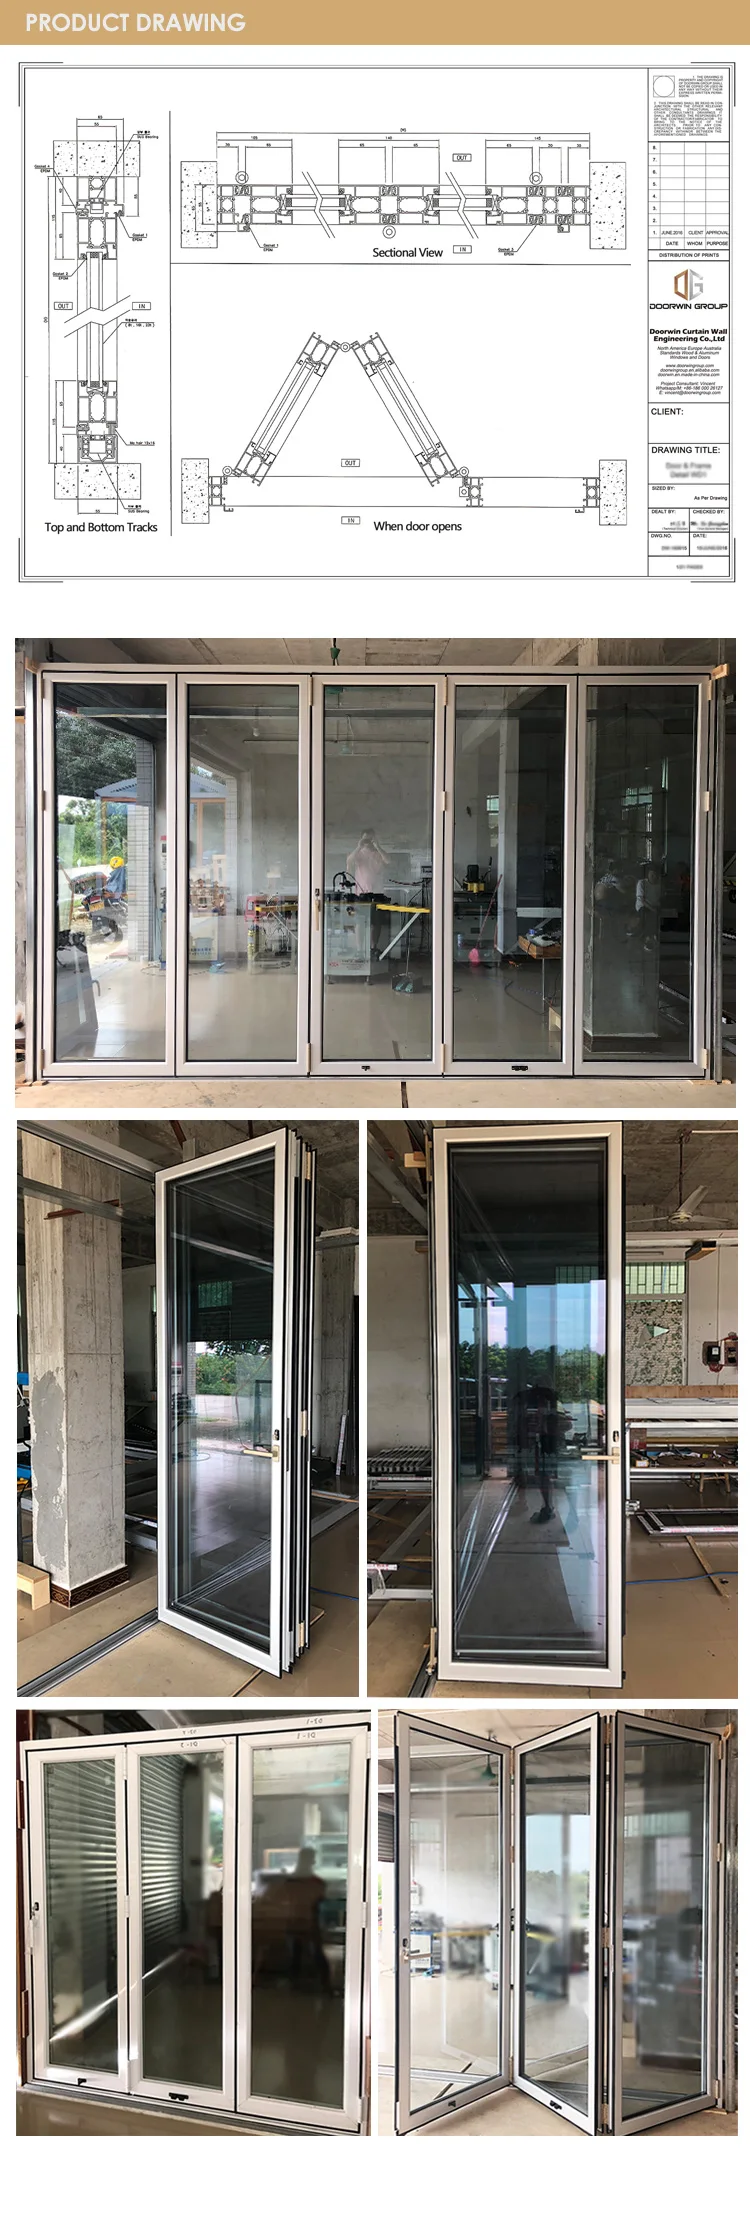 Western Double Glazed Soundproof  White Thermally Broken Insulated Aluminum Bifold Folding Windows & Doors with Built-In Shutter